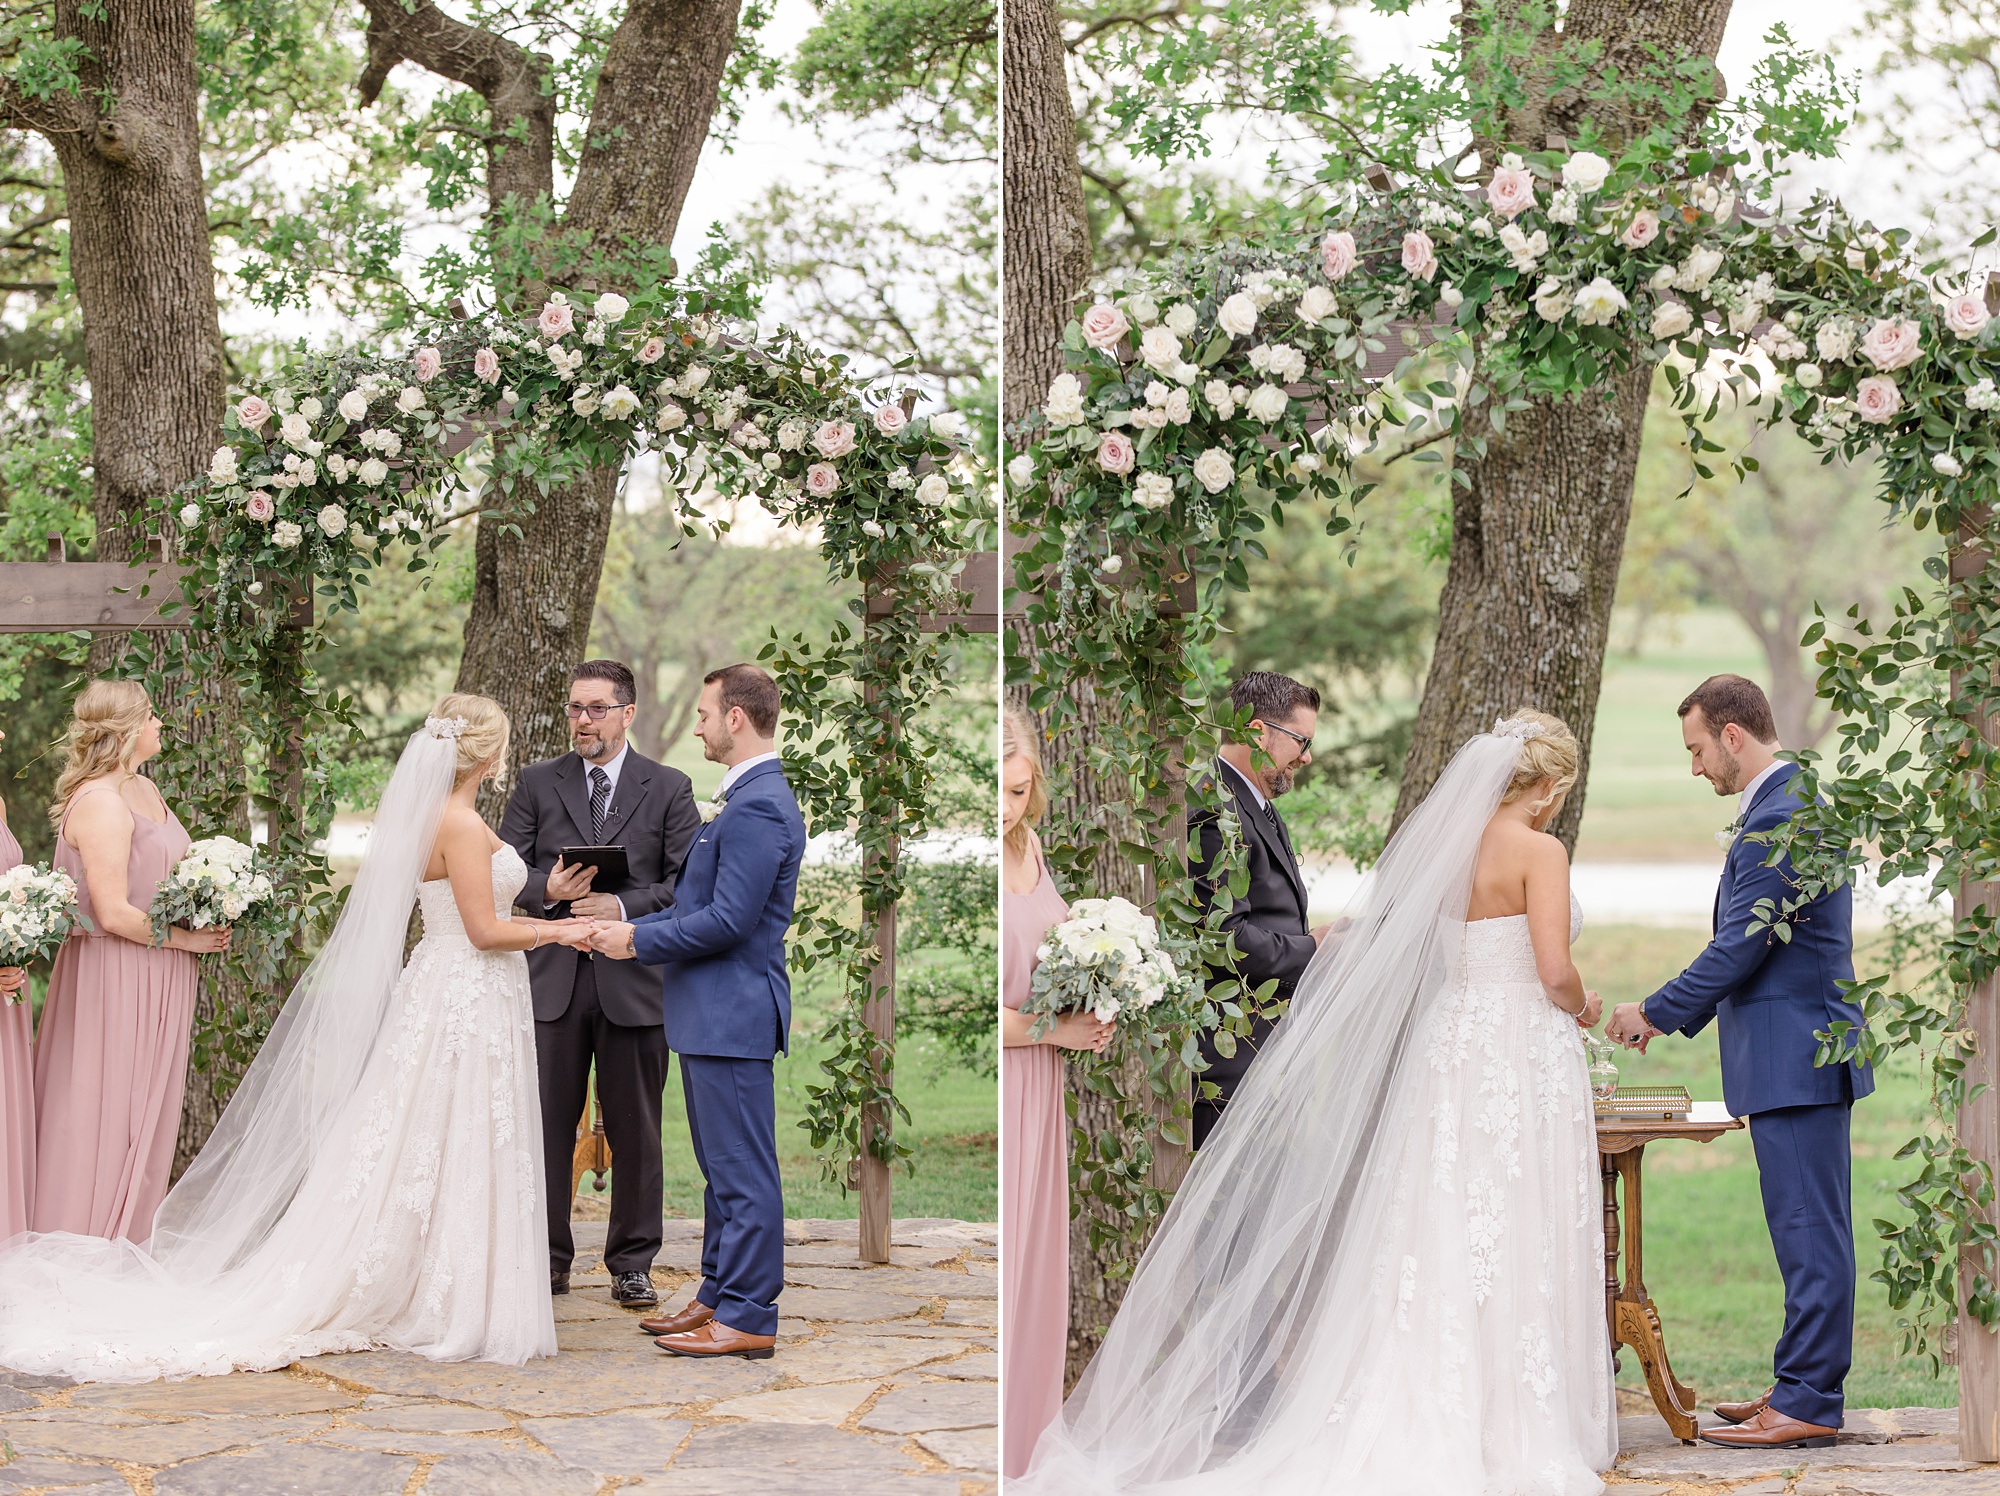 classic outdoor wedding ceremony under floral arbor at Oak + Ivy